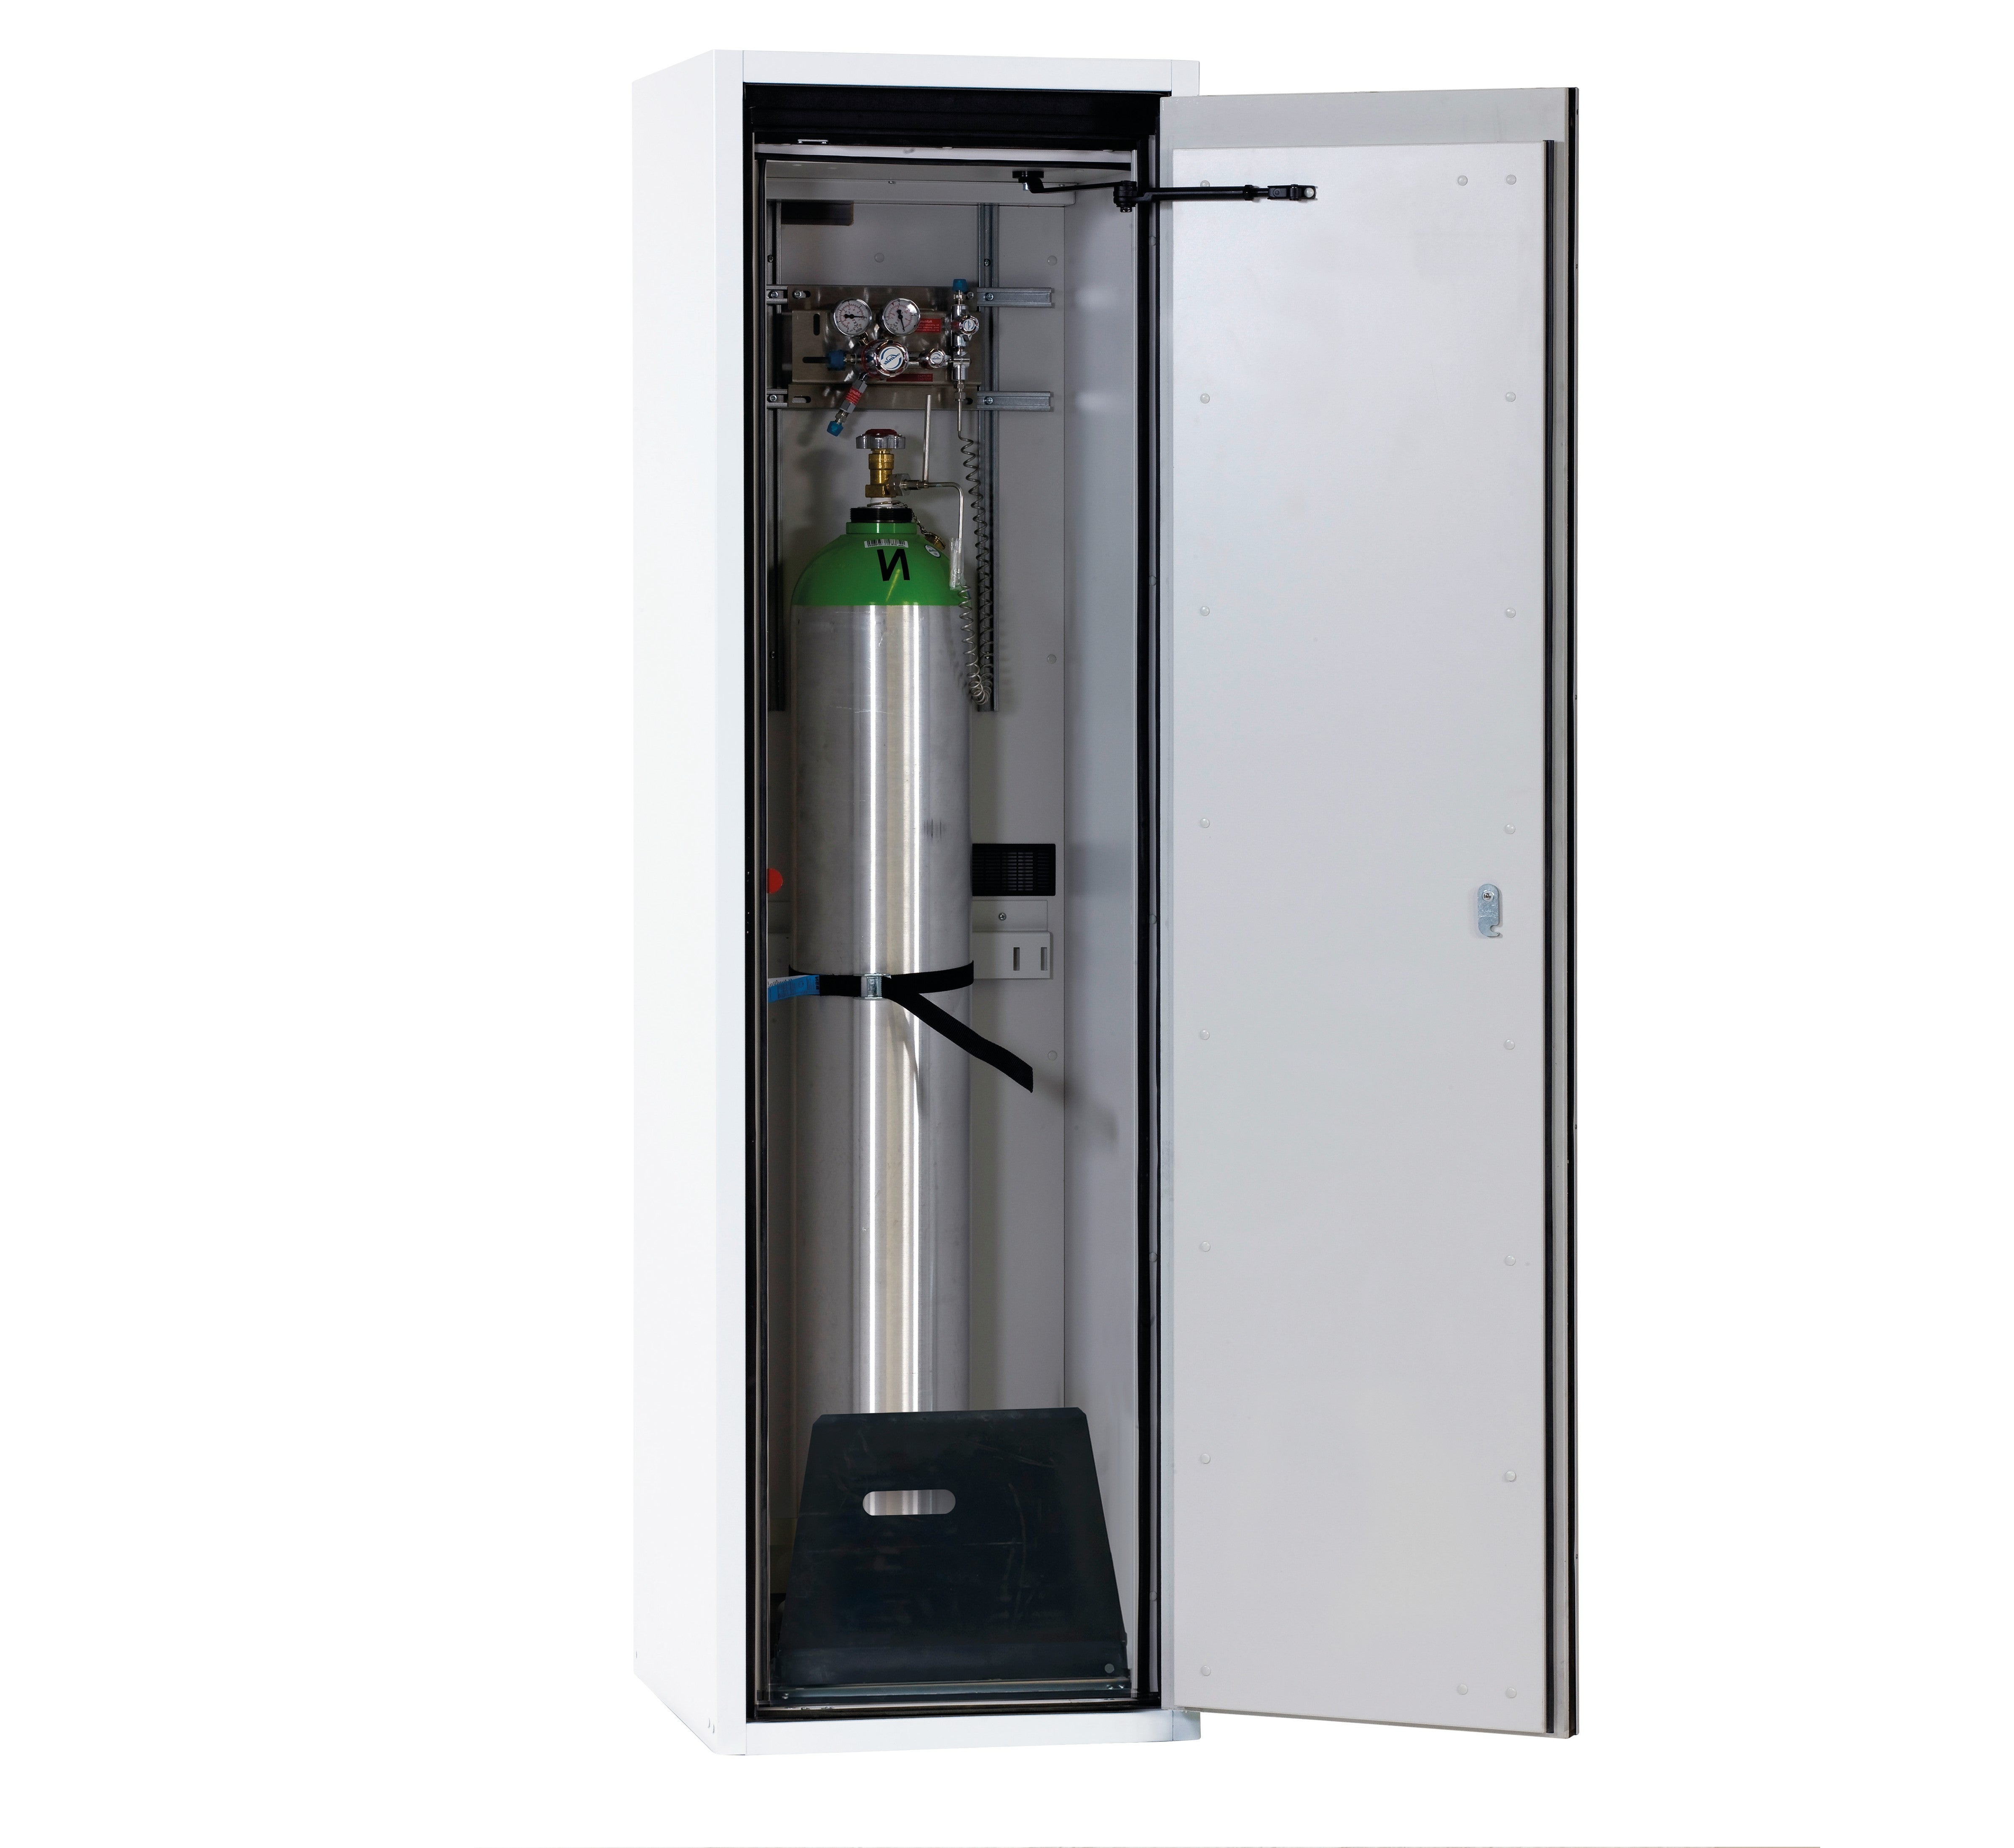 Type 90 compressed gas bottle cabinet G-ULTIMATE-90 model G90.205.060.R in laboratory white (similar to RAL 9016) with standard interior fittings for 1x compressed gas bottles of 50 liters each